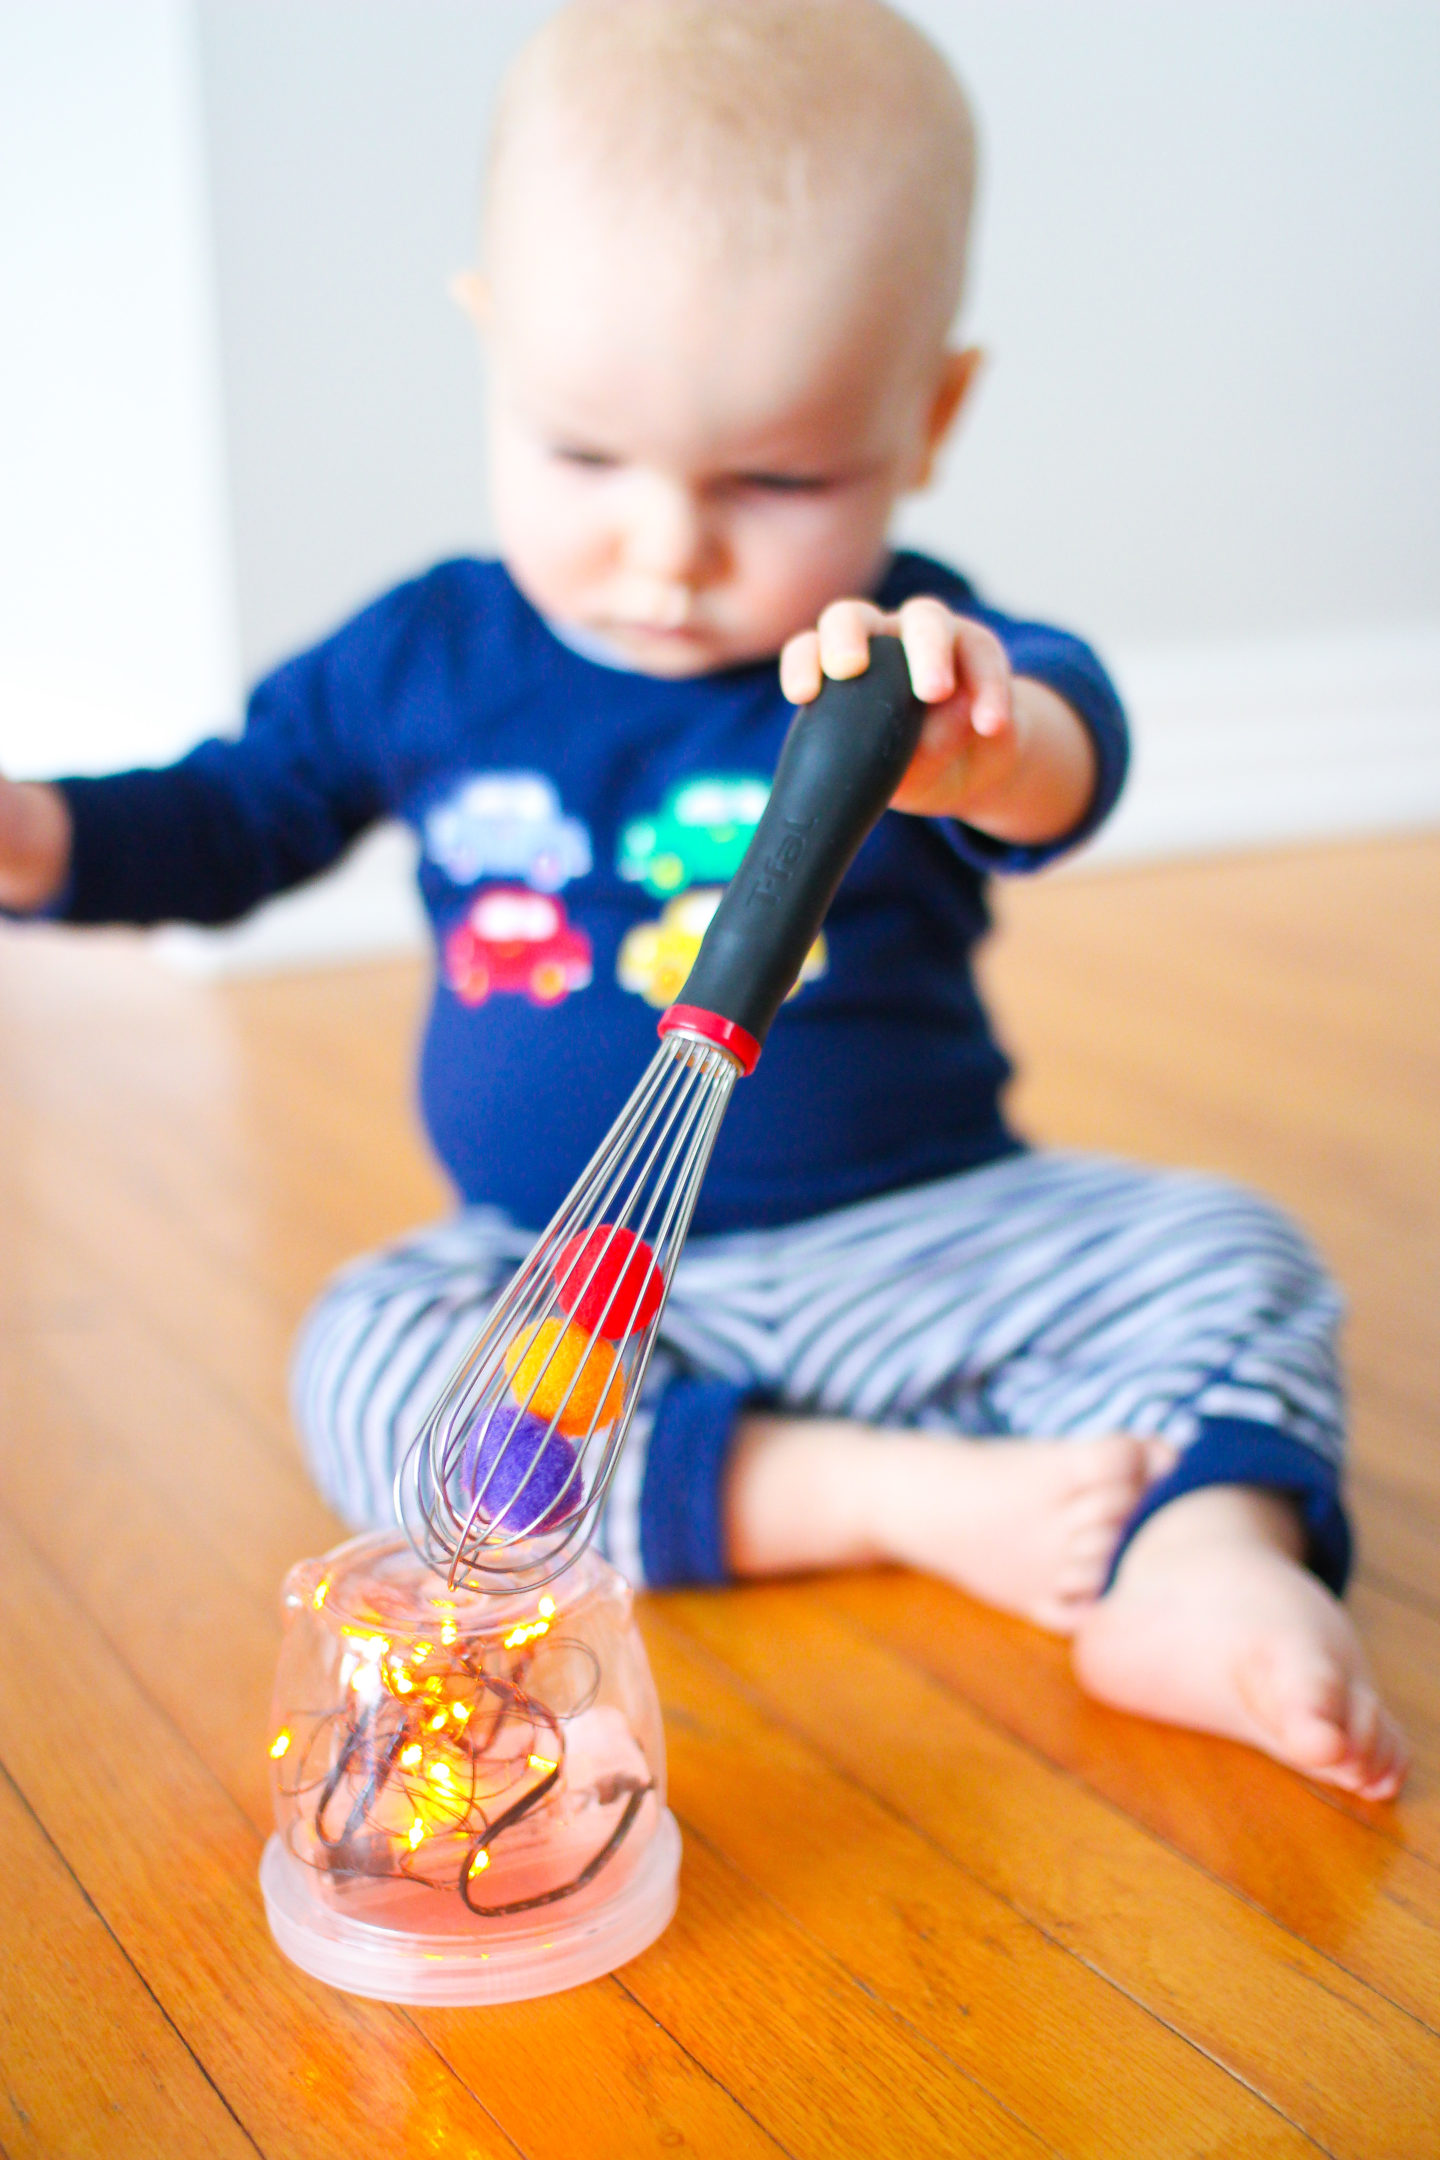 Loose Parts play for Infants and Toddlers